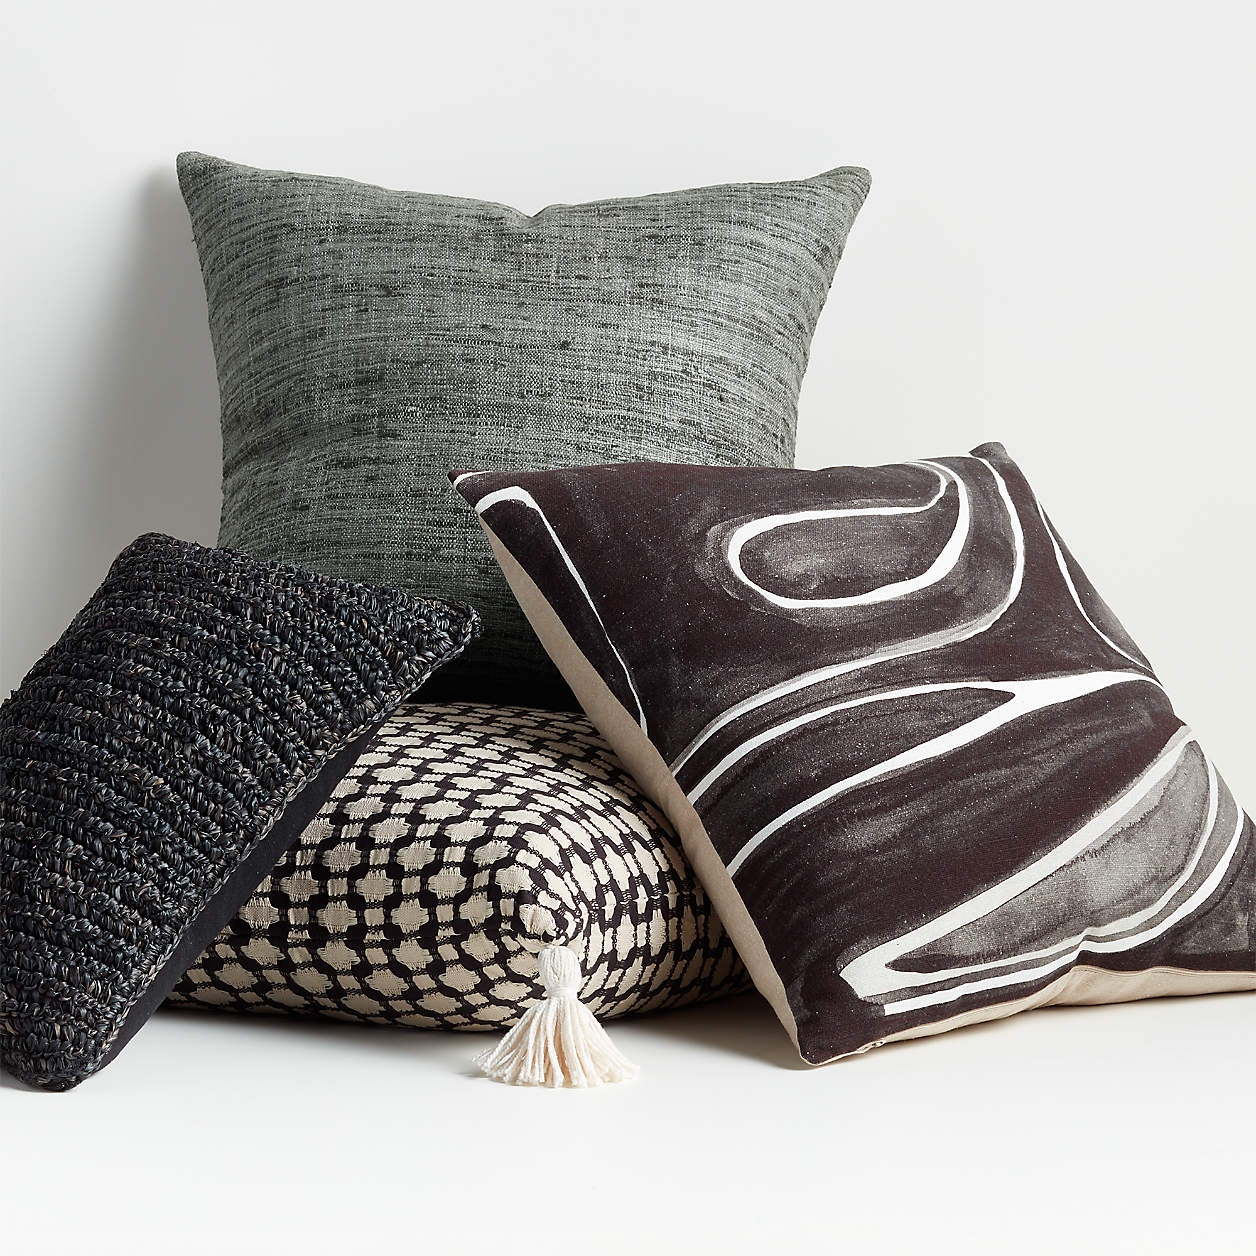 Tahona Textured Pillow with Down-Alternative Insert, 23" x 23", Obsidian - Image 4